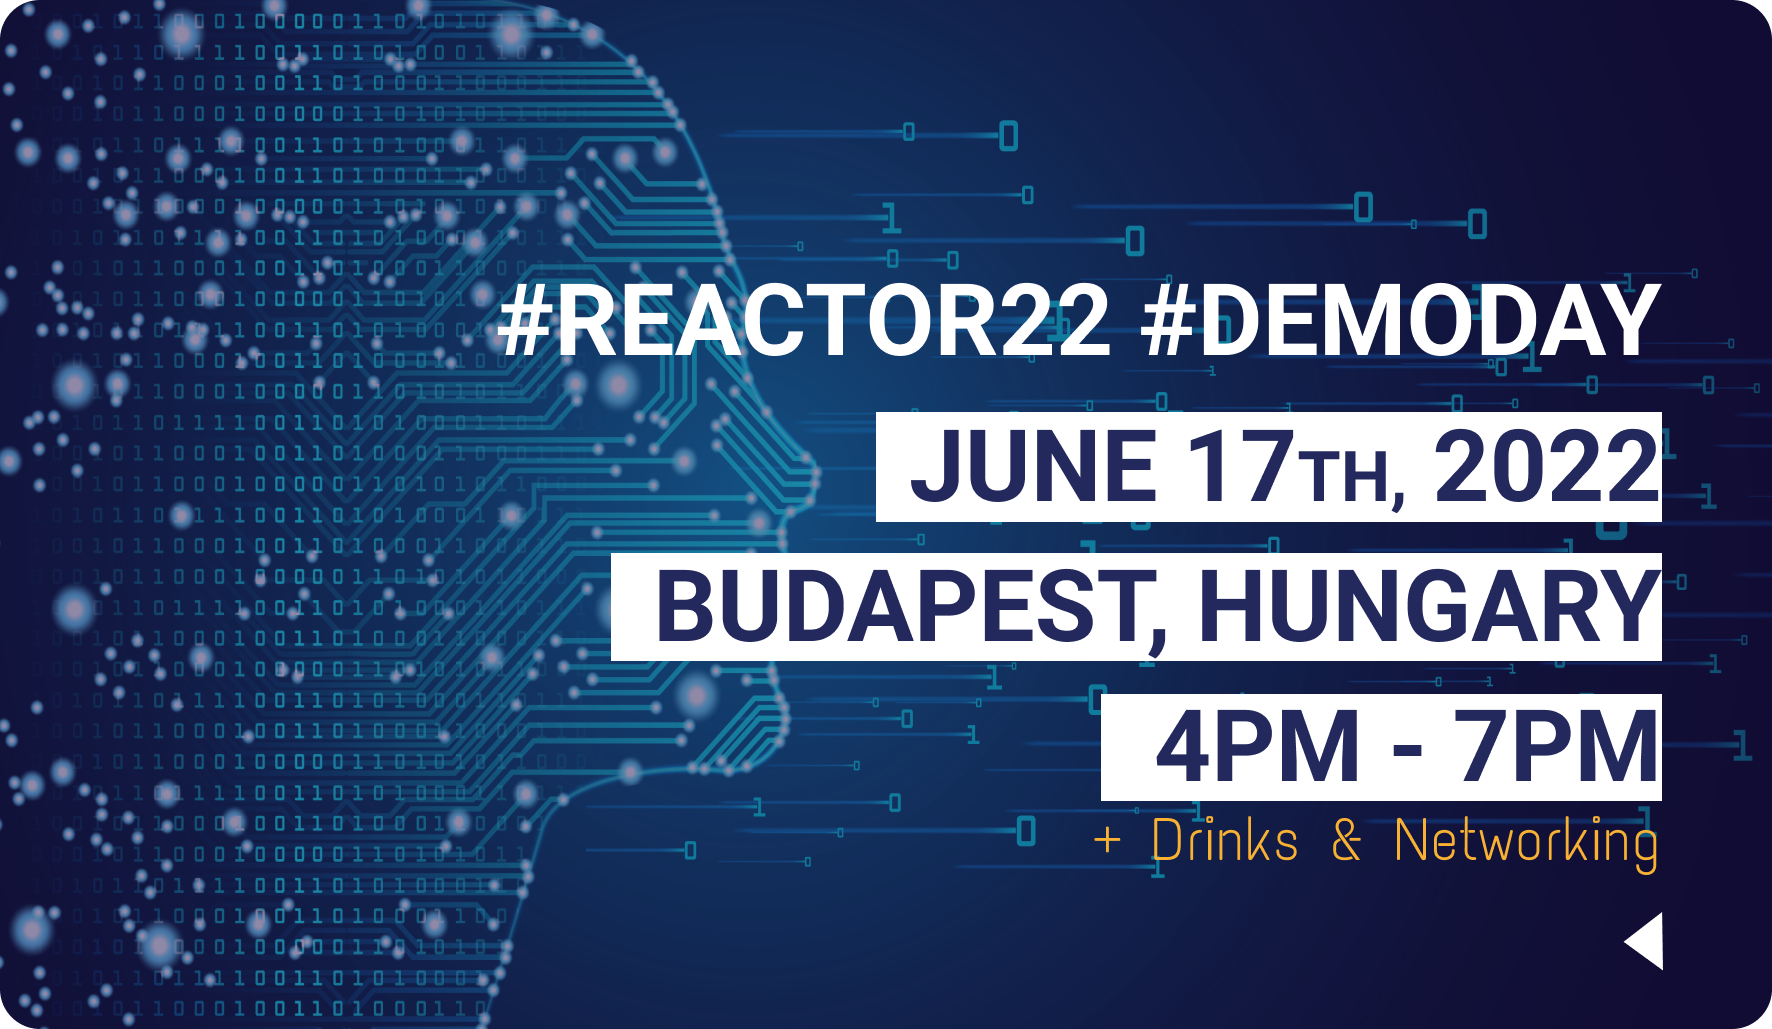 Gearing up for the Reactor'22 Demo Day!